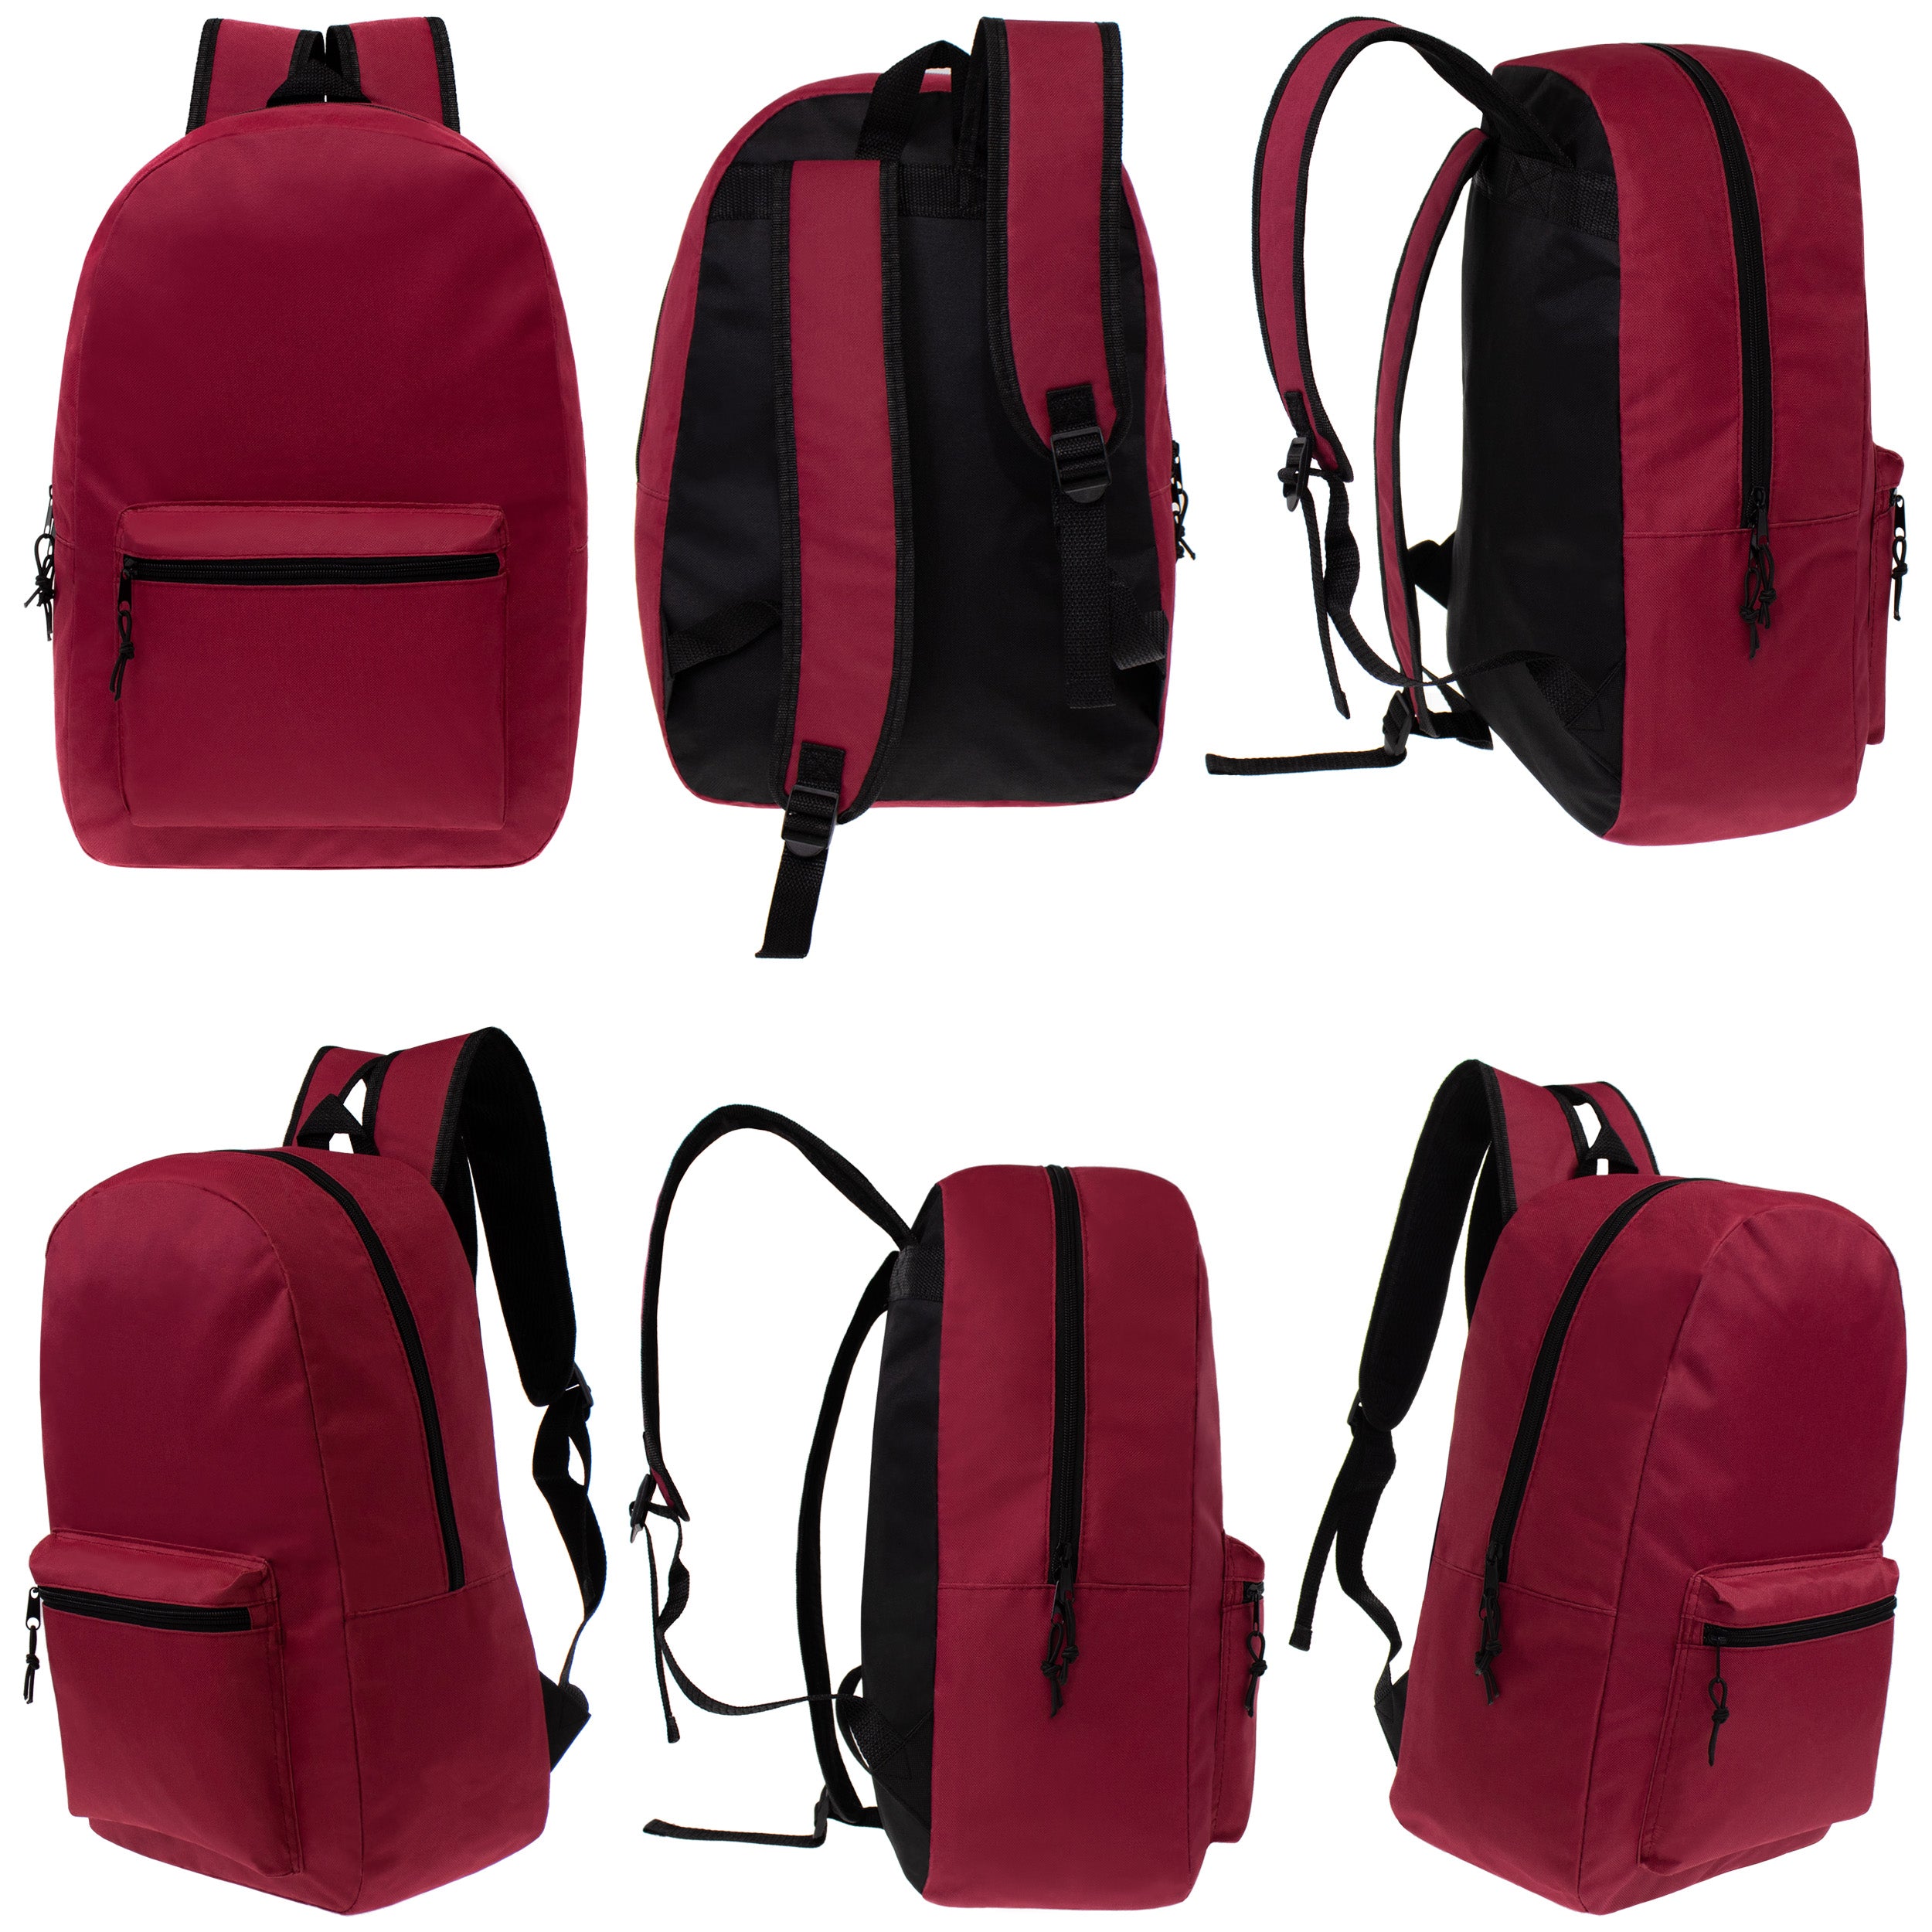 Assorted Color Wholesale Backpacks 24 Pieces